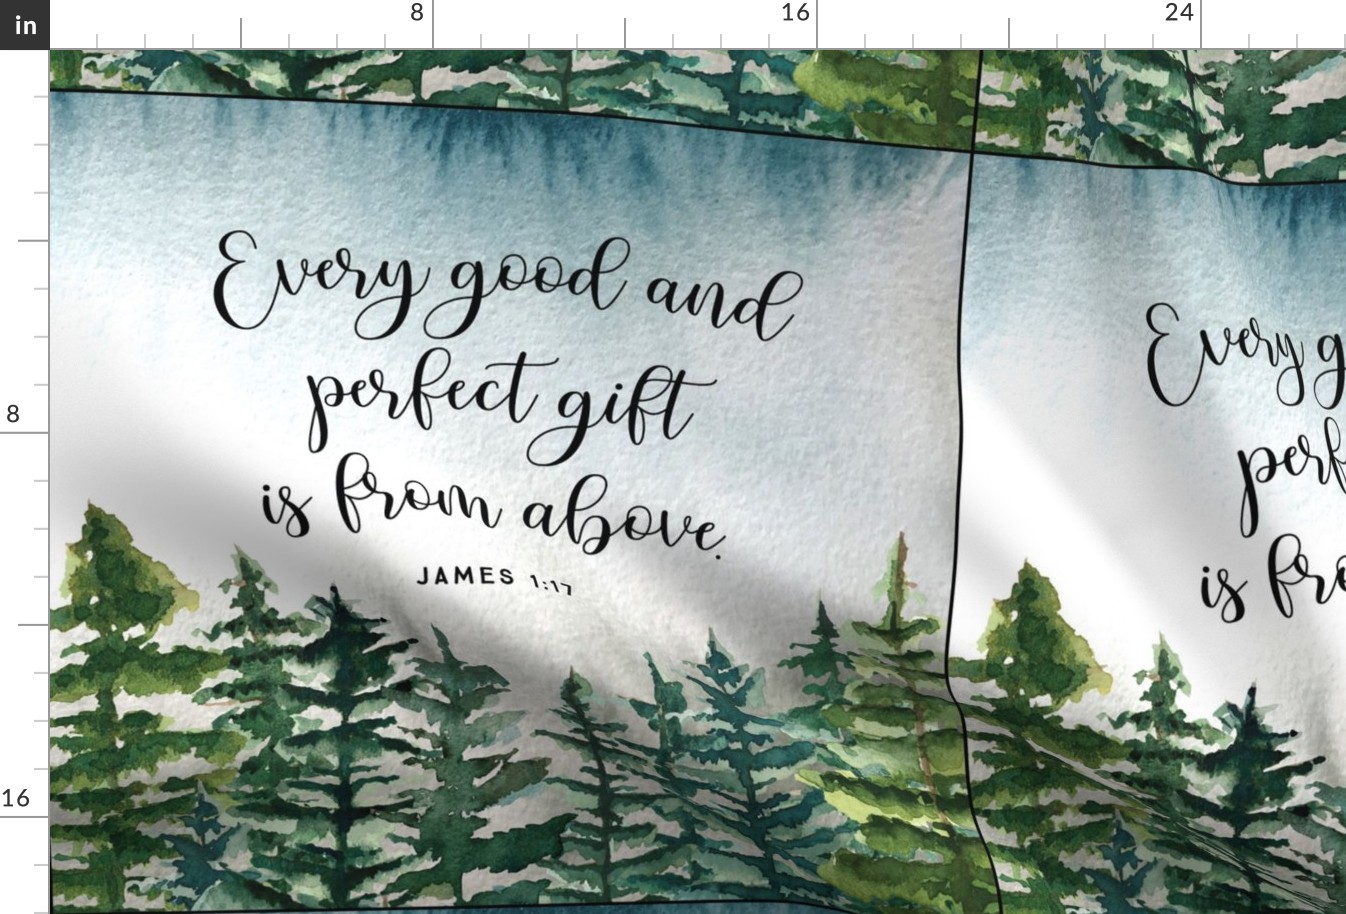 6 loveys: every good and perfect gift is from above // john 1:17 